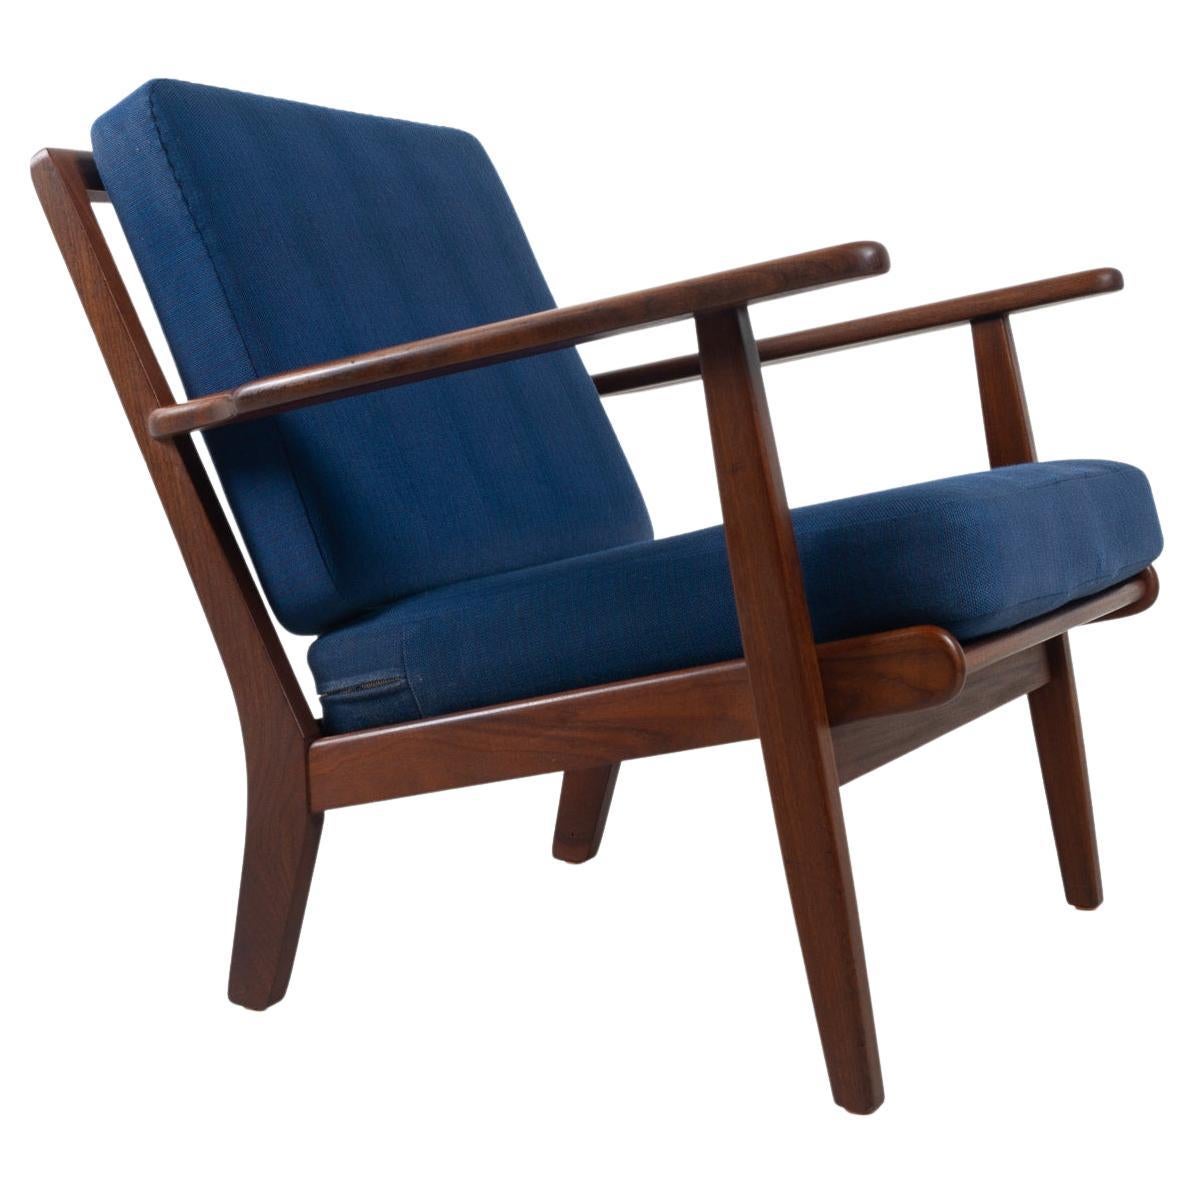 Vintage Danish Lounge Chair by Aage Pedersen for Getama, 1960s For Sale